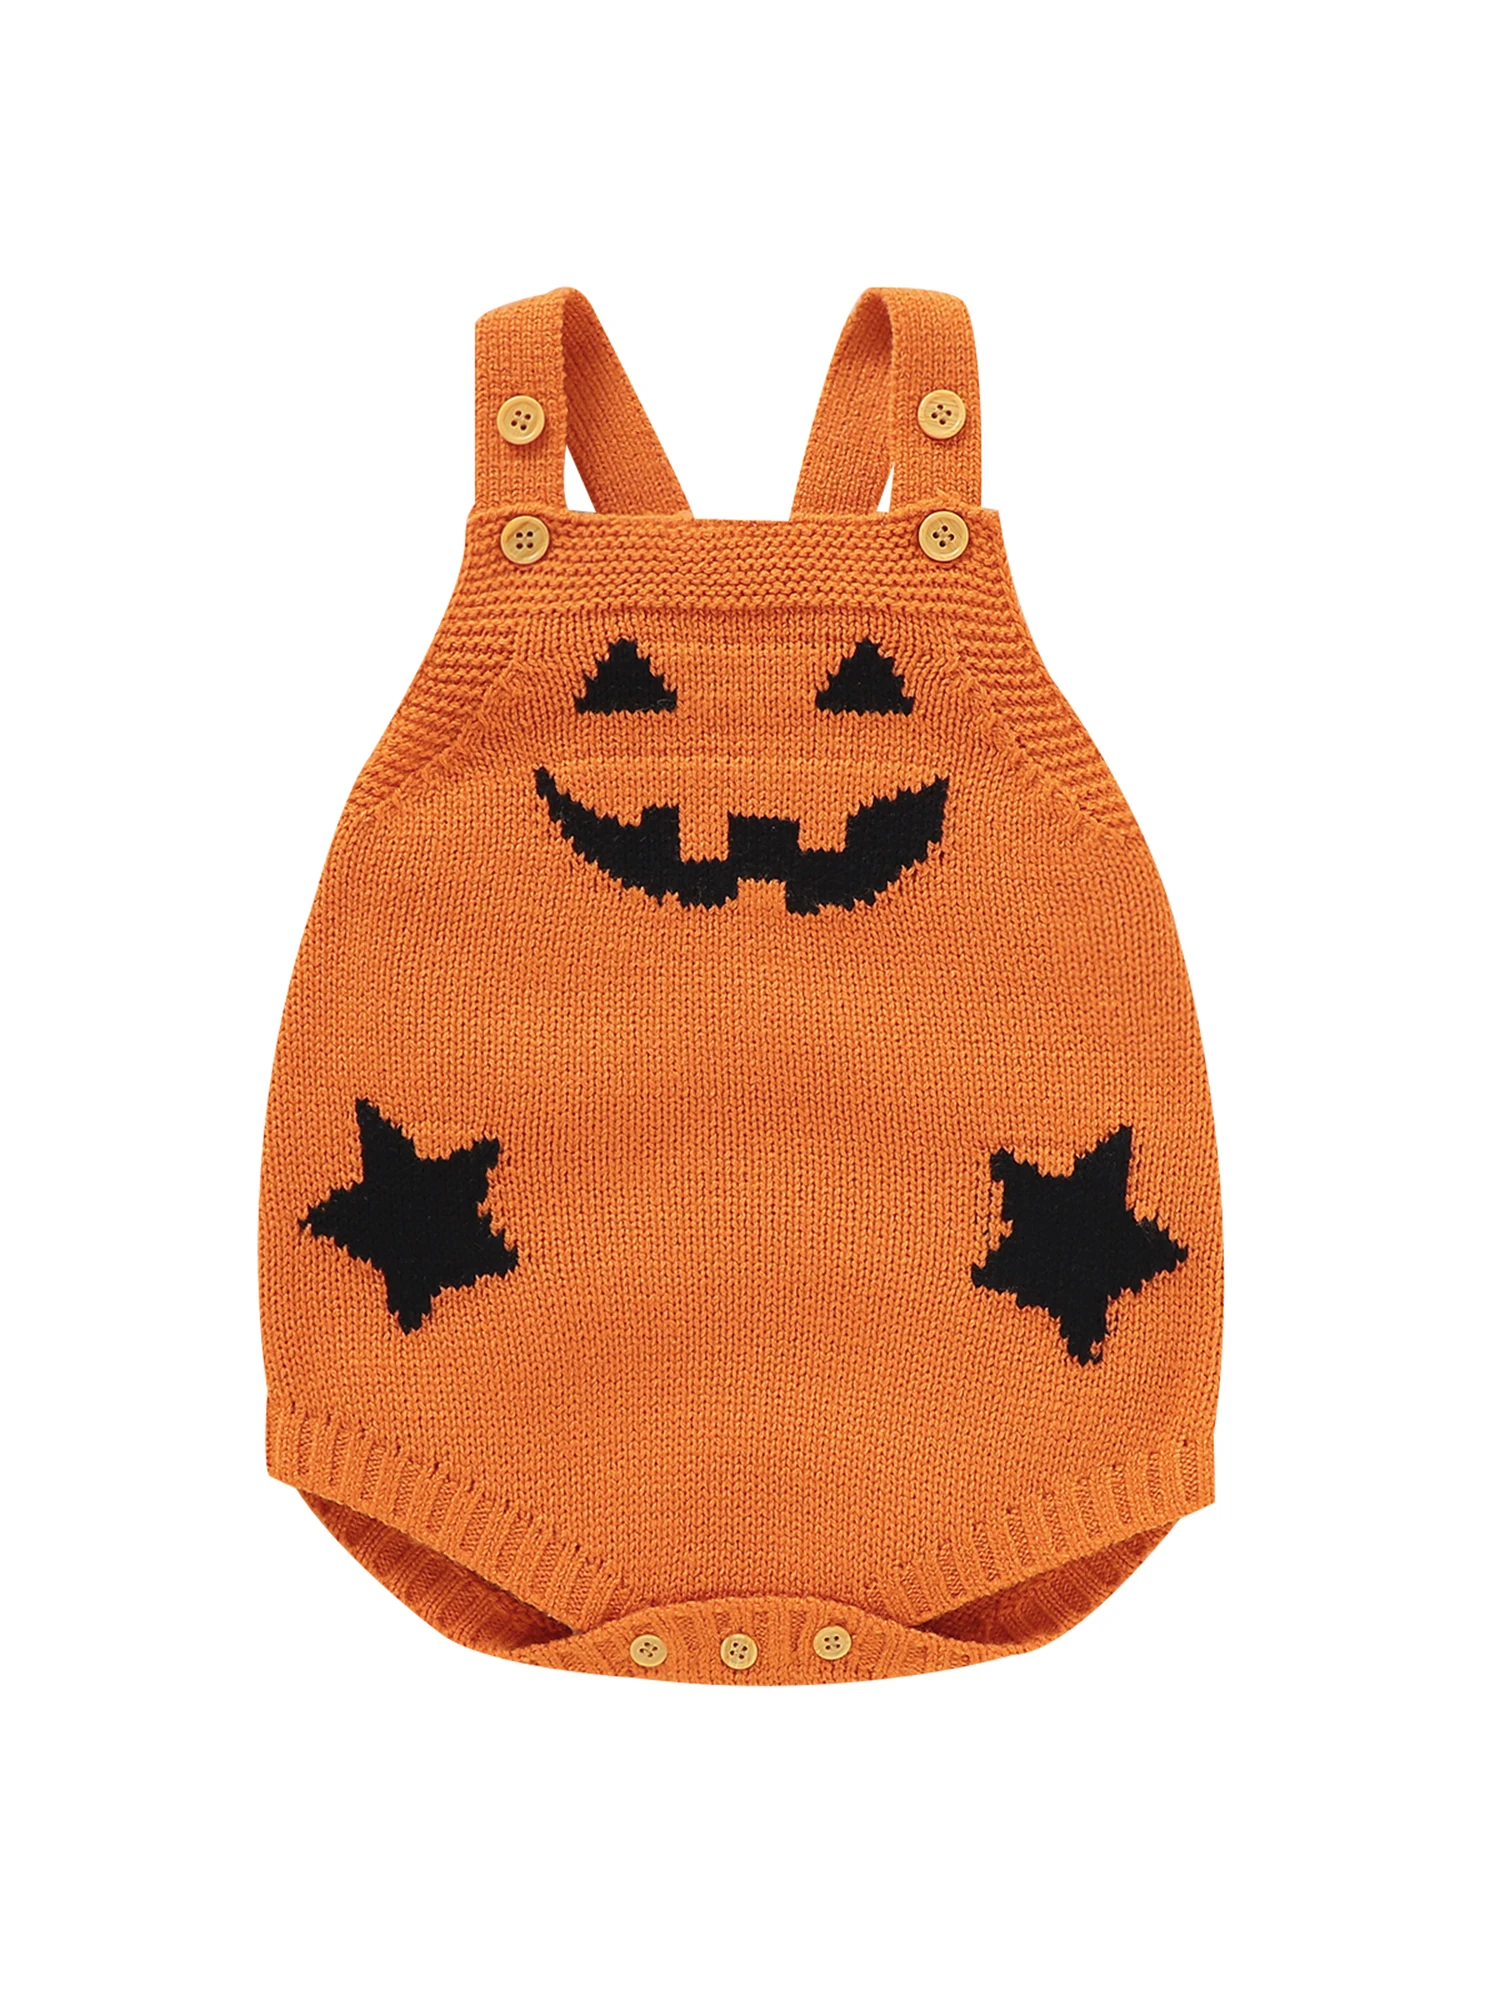 

Cute Halloween Costume for Infants Adorable Pumpkin Knitted Suspender Romper for Baby Boys and Girls Perfect for Fall